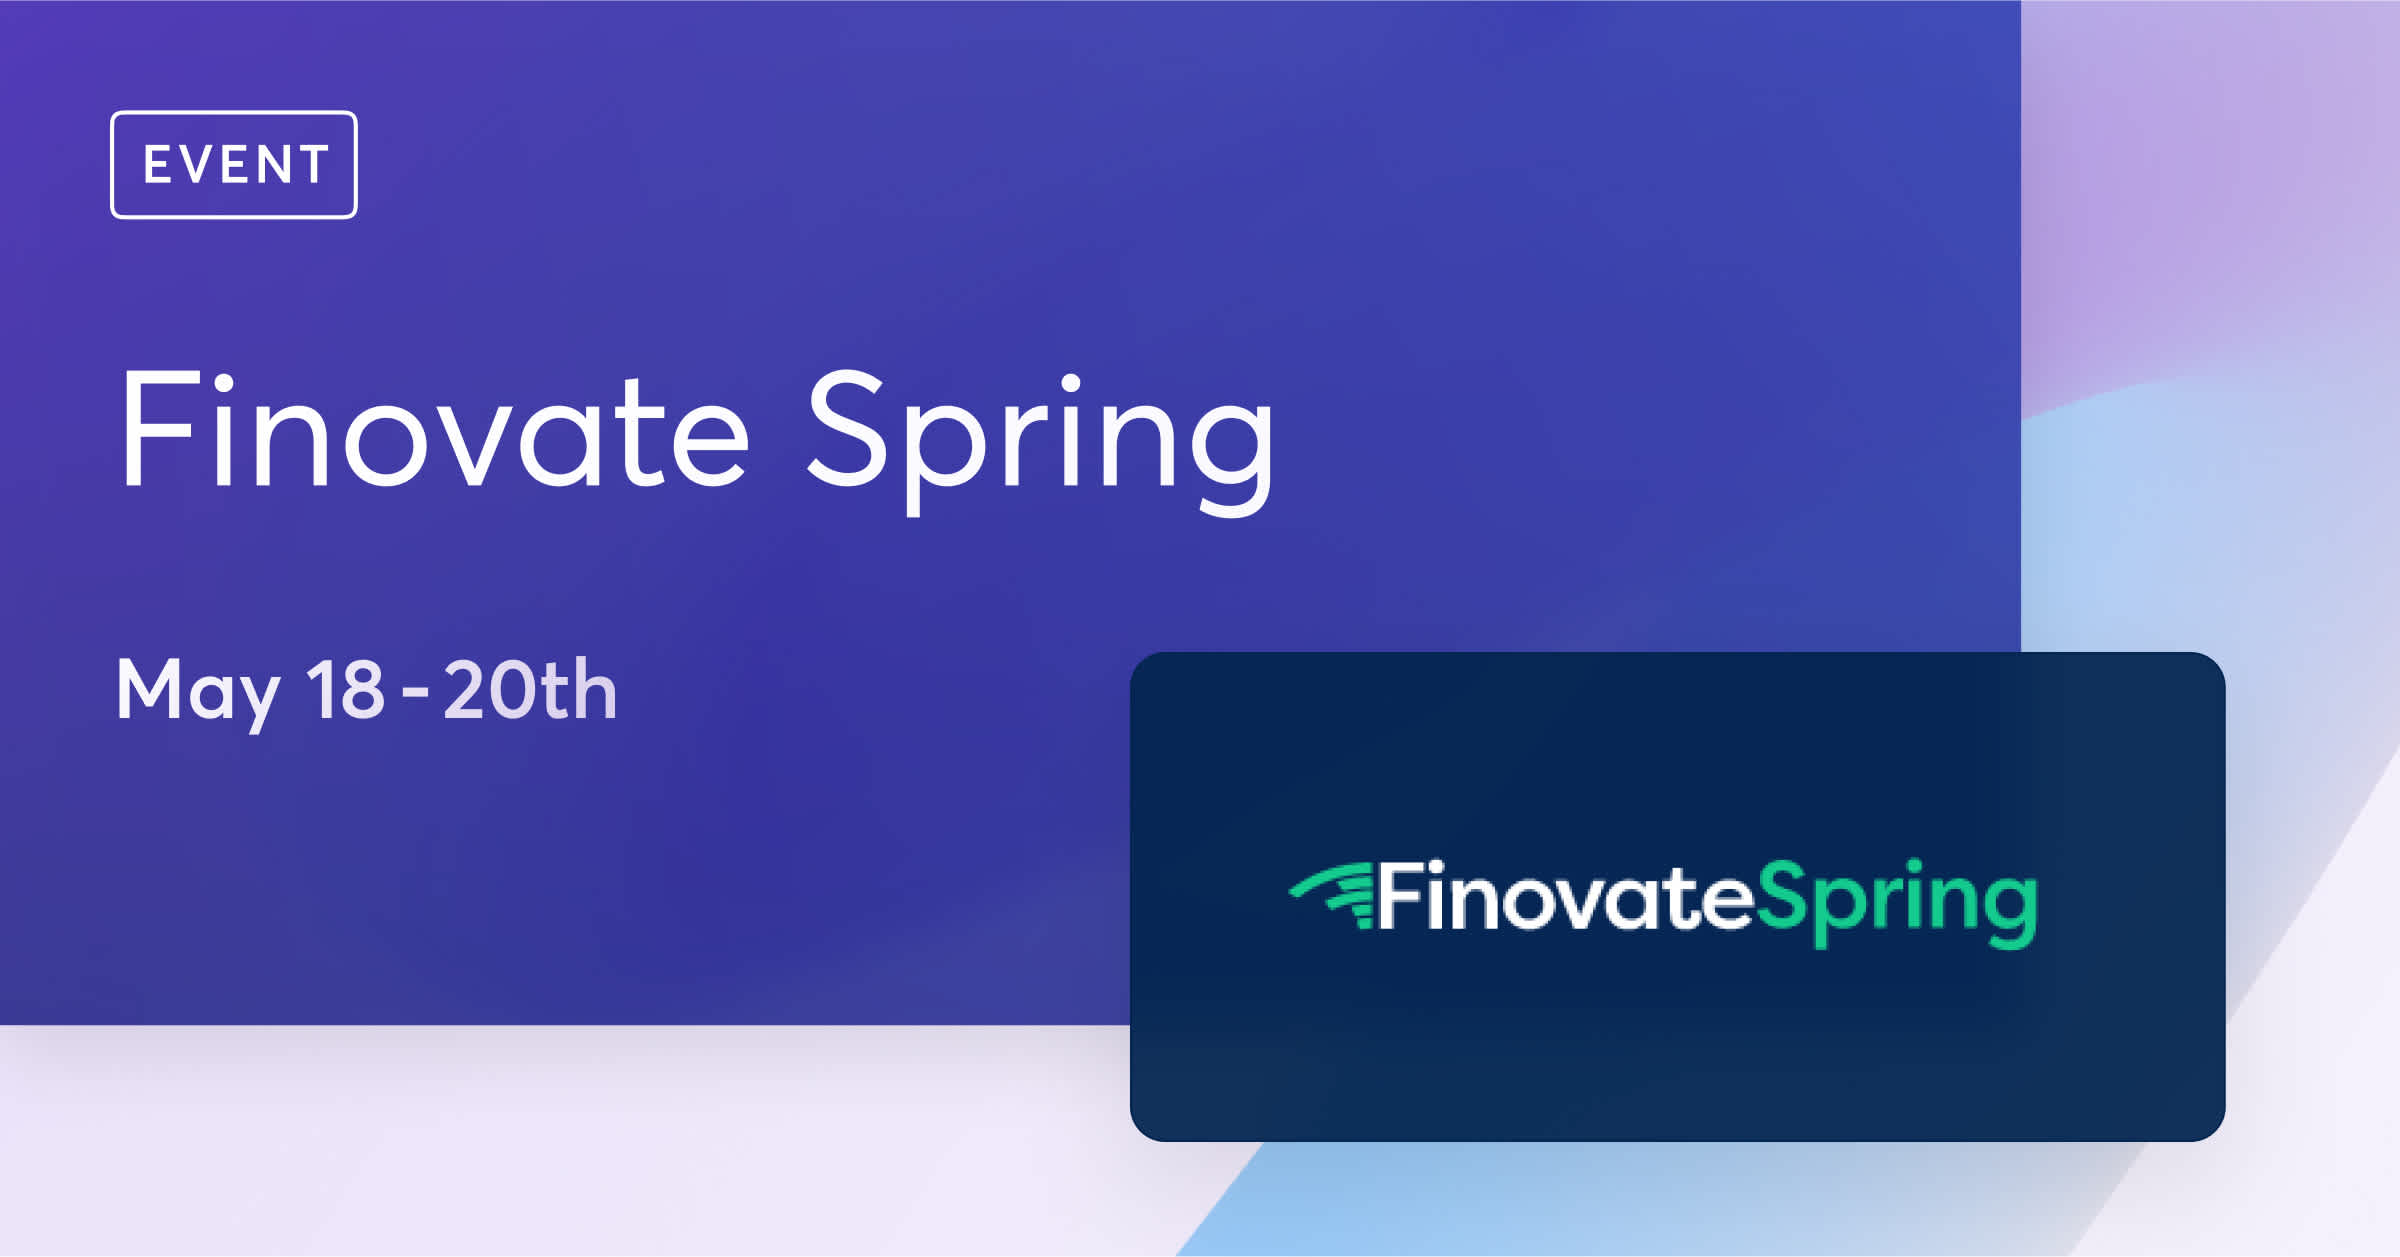 Join us at Finovate Spring